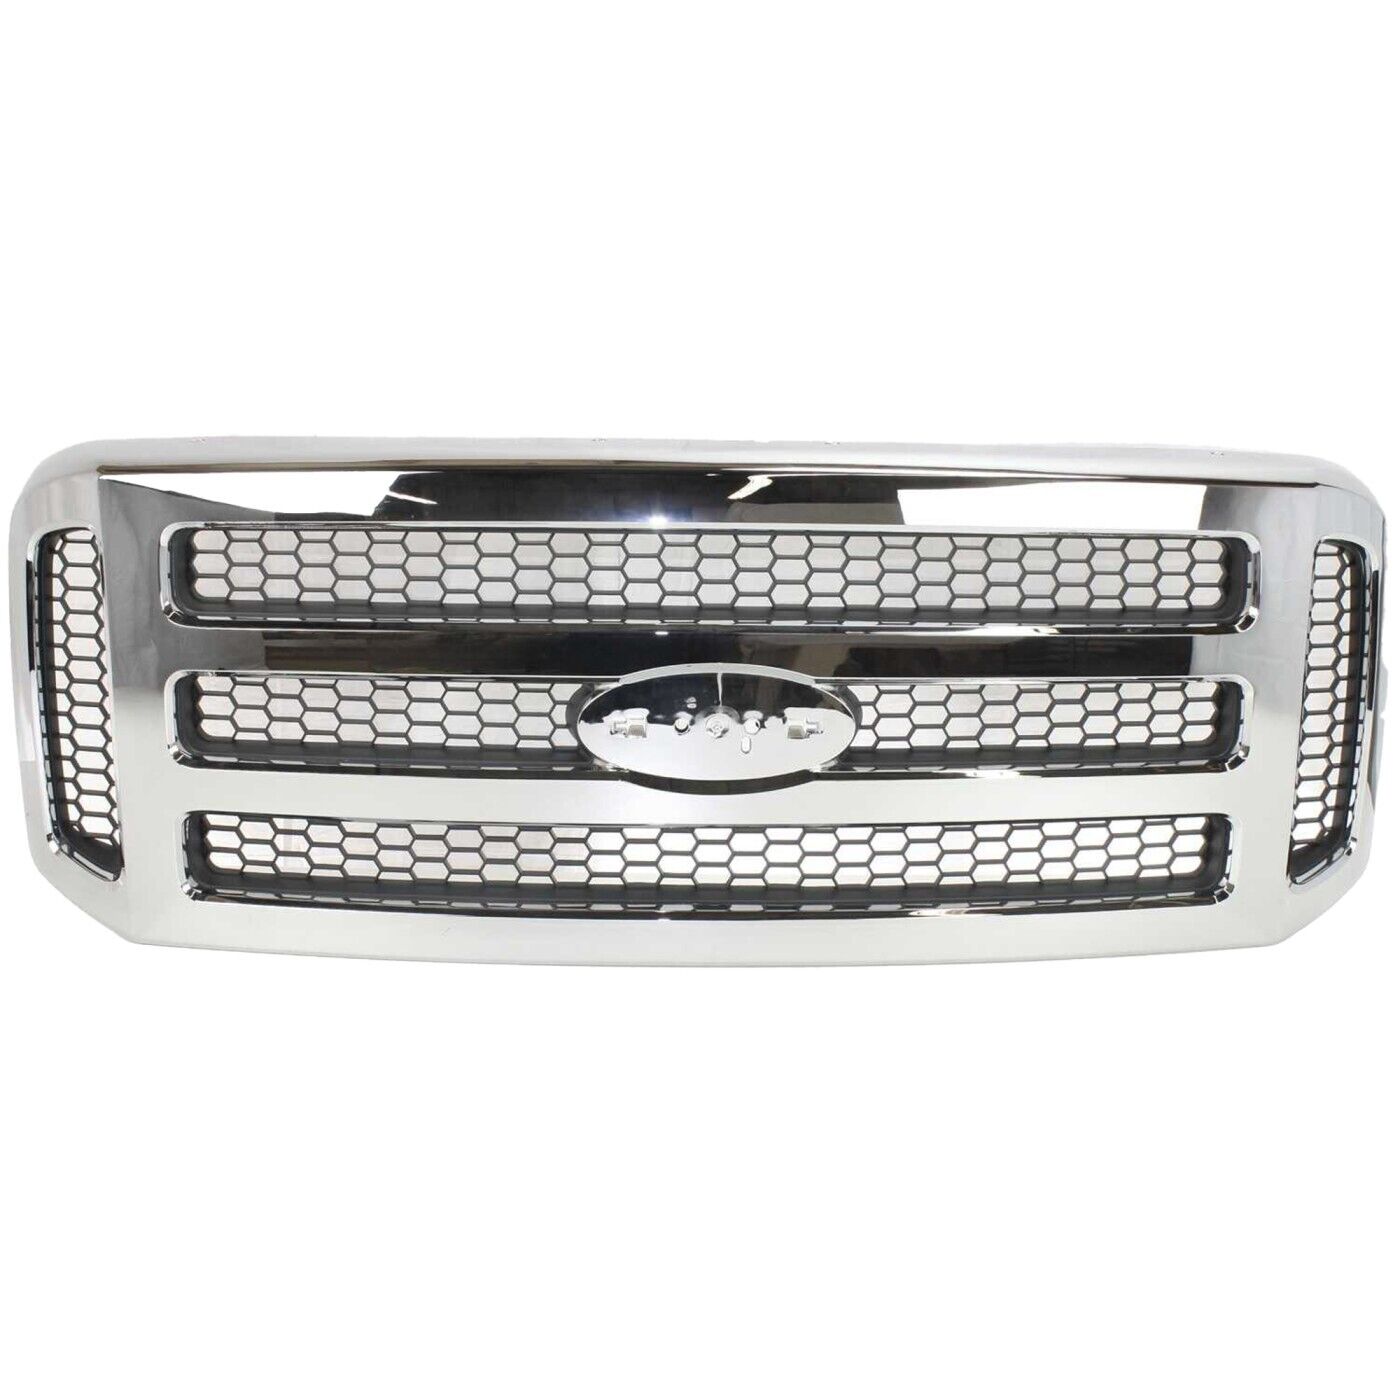 Grille Assembly For 2005-07 Ford F-250 F-350 Super Duty Chrome Shell/Gray Insert